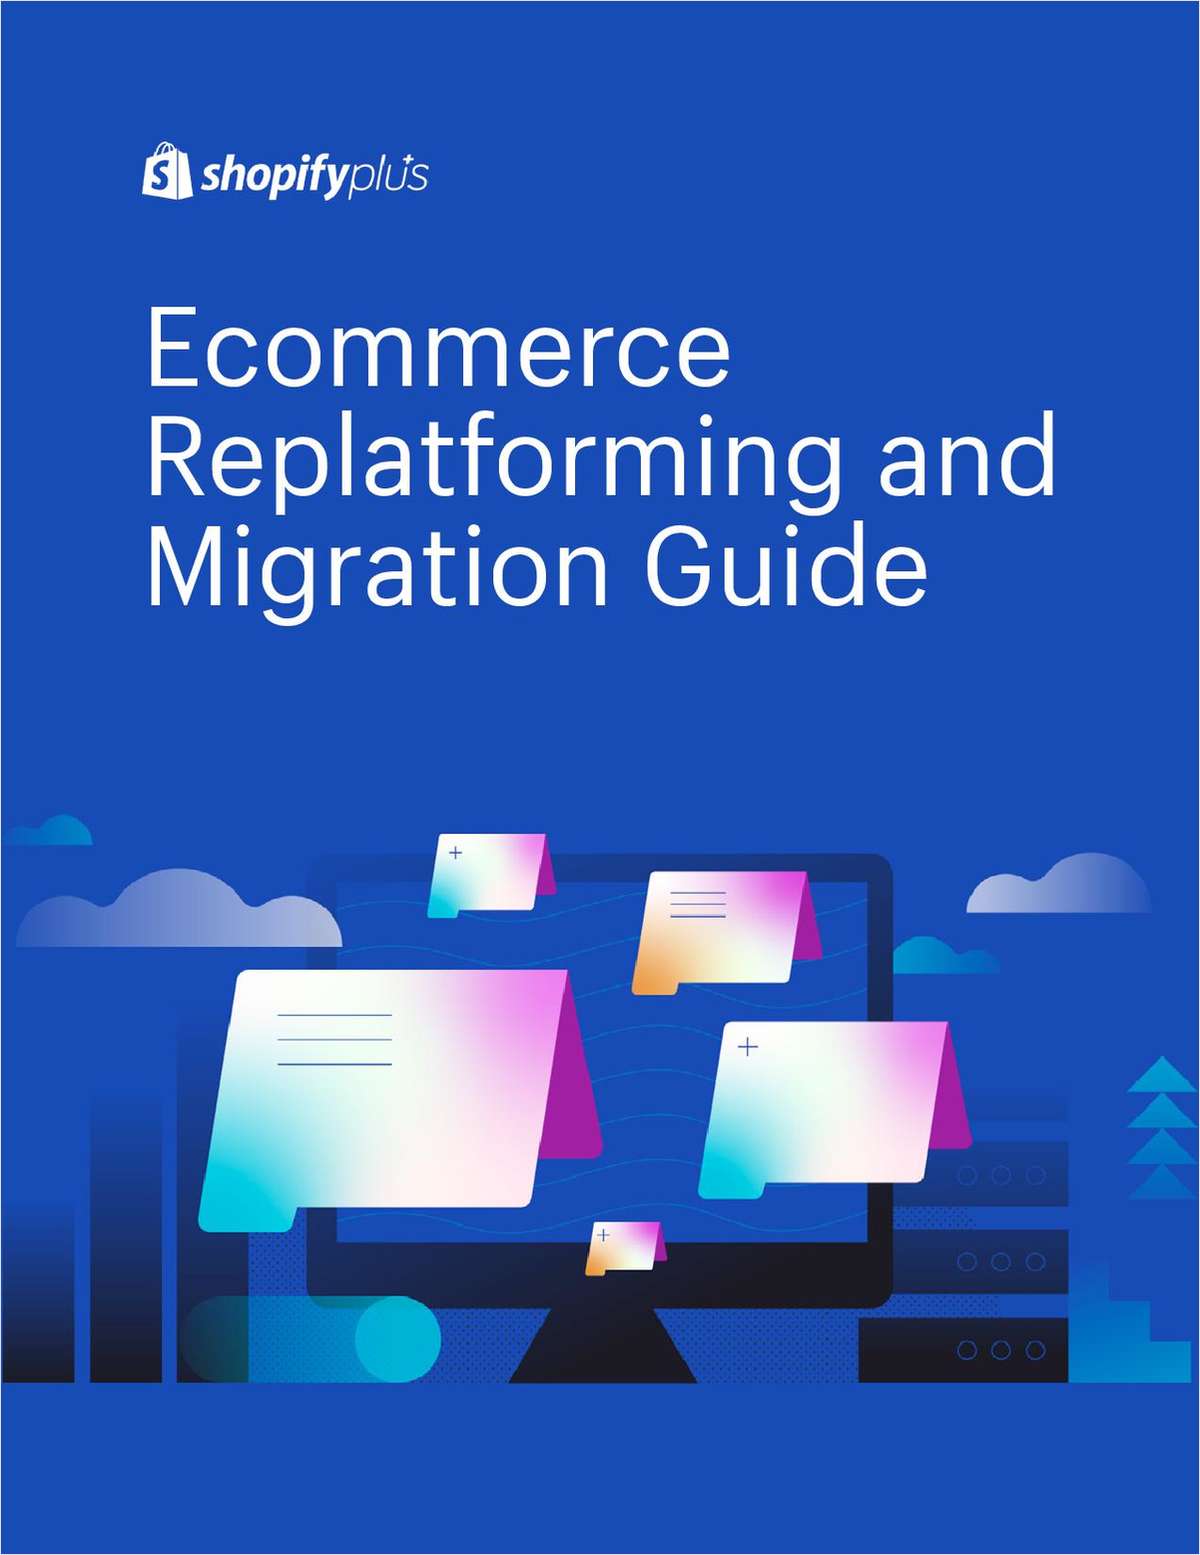 Everything You Need to Effectively Navigate Ecommerce Migration and Replatforming